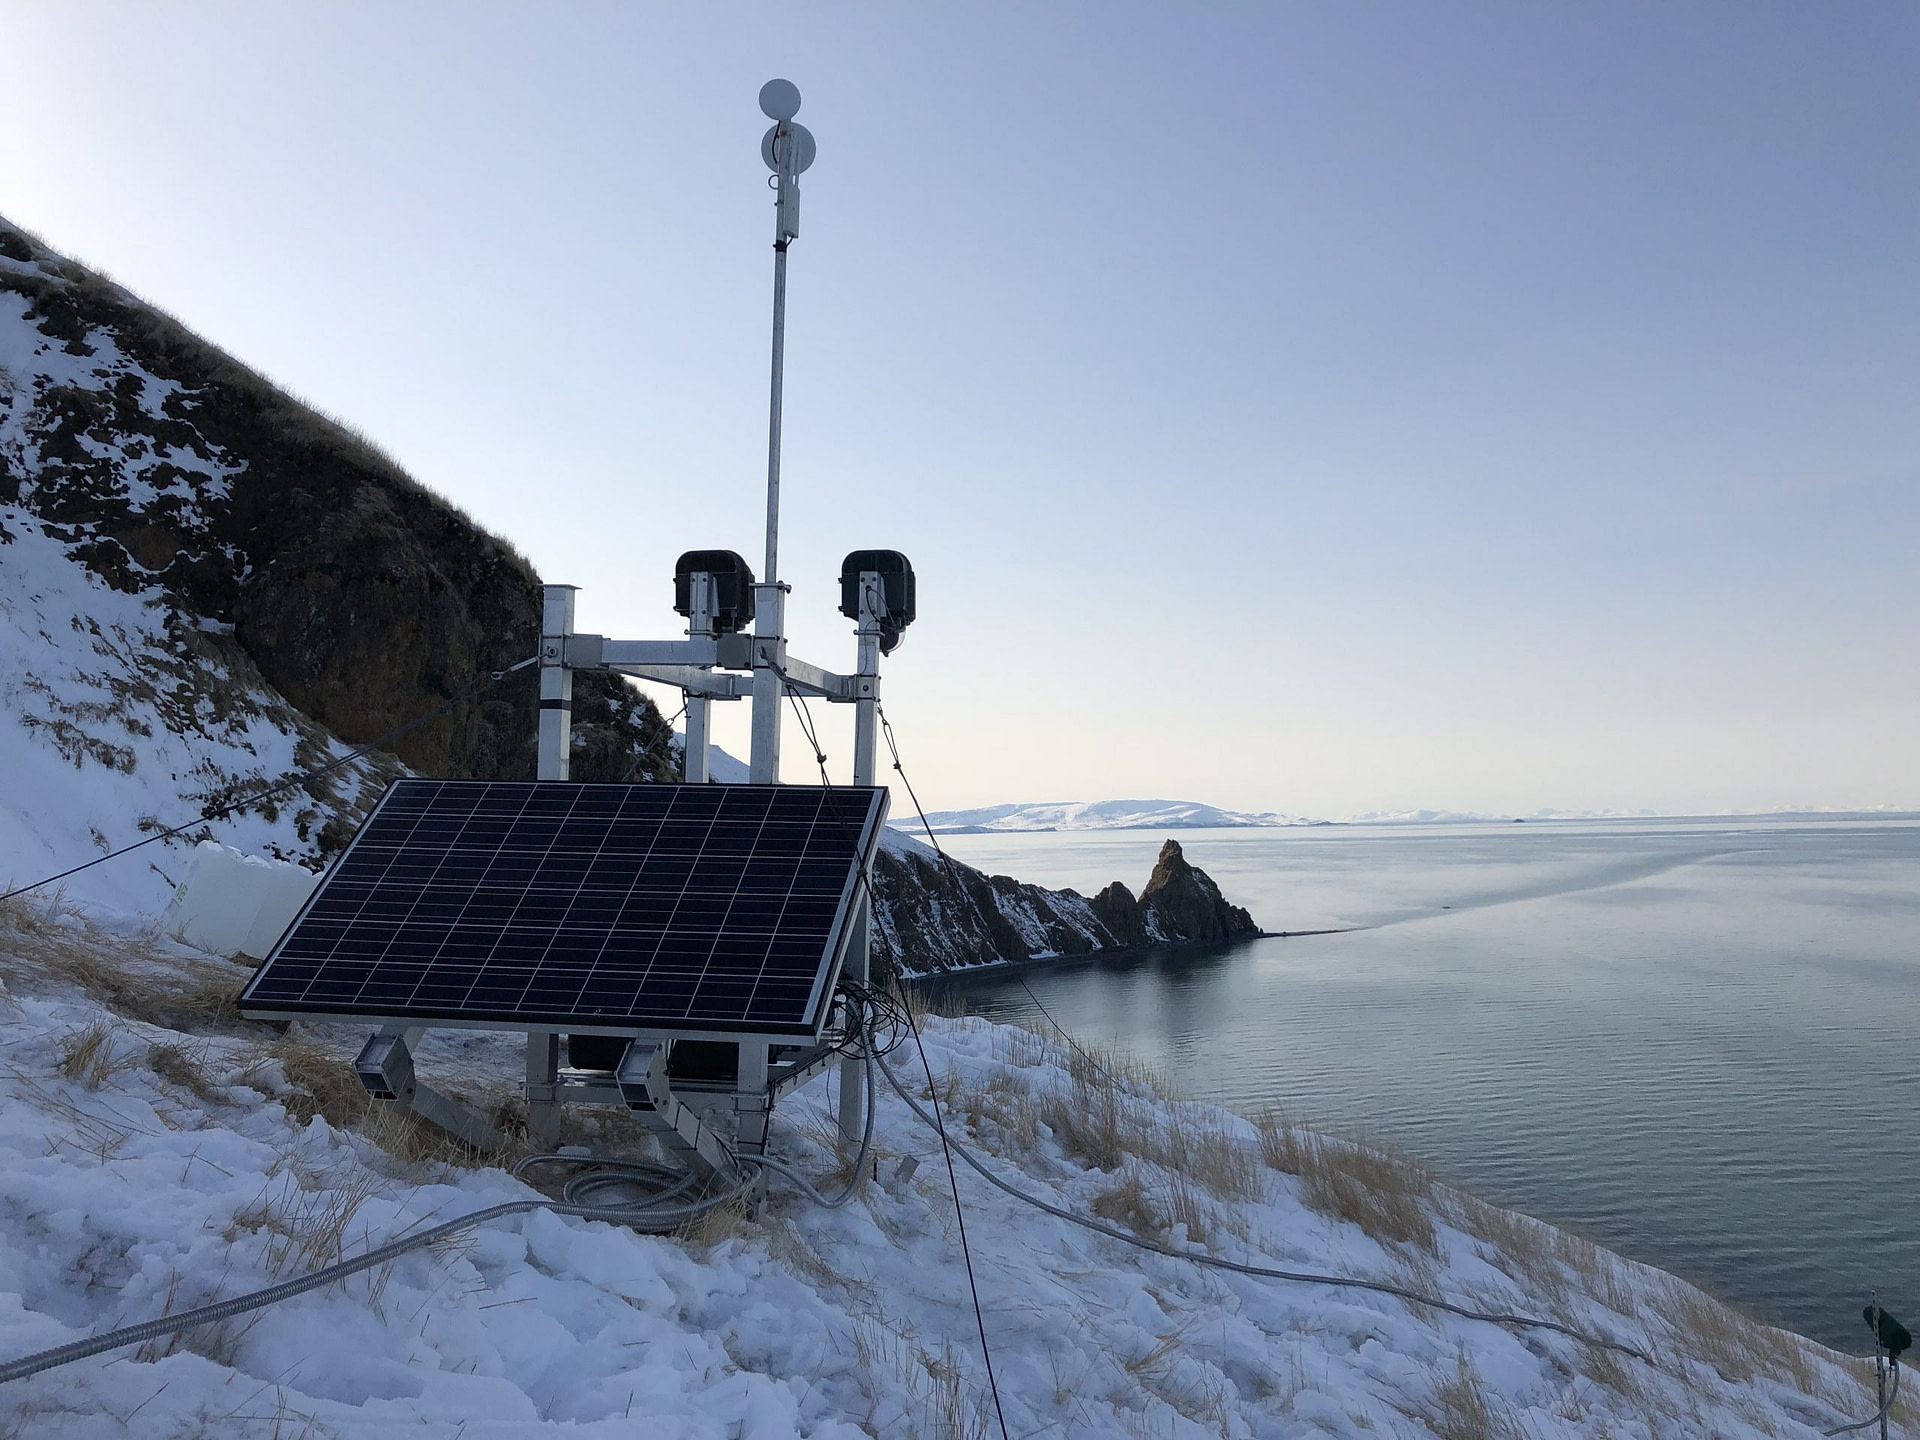 XClear Self Cleaning Camera Enclosures Installed On Round Island Alaska Overlooking Walrus On Main Beach 